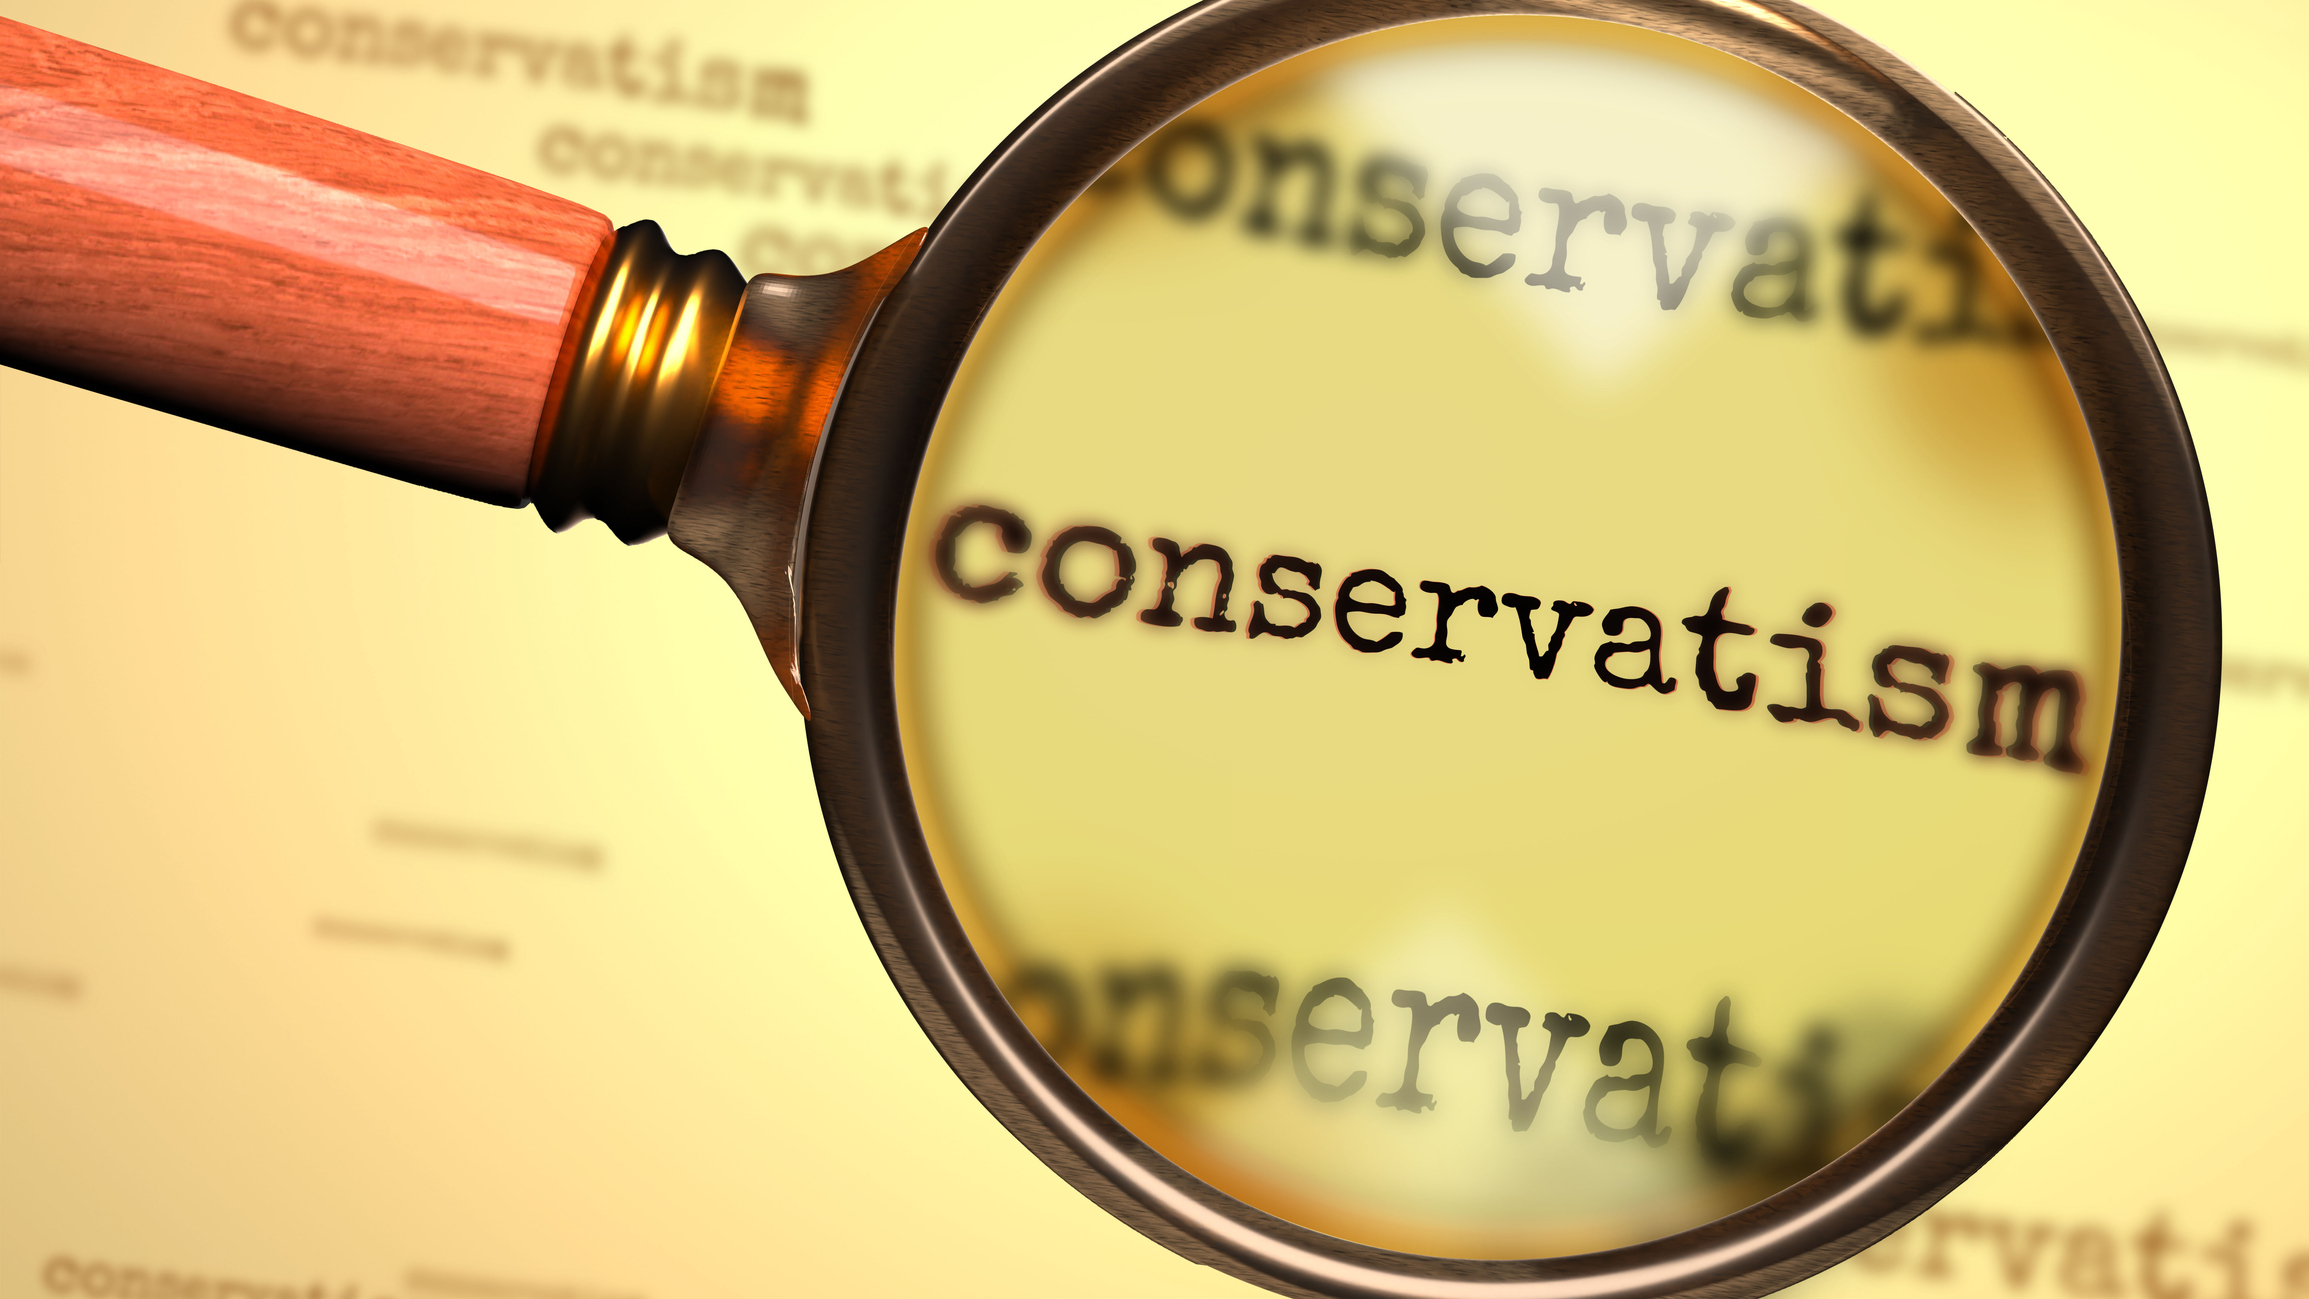 Conservatism – word and a magnifying glass enlarging it to symbolize studying, examining or searching for an explanation and answers related to the idea of Conservatism, 3d illustration